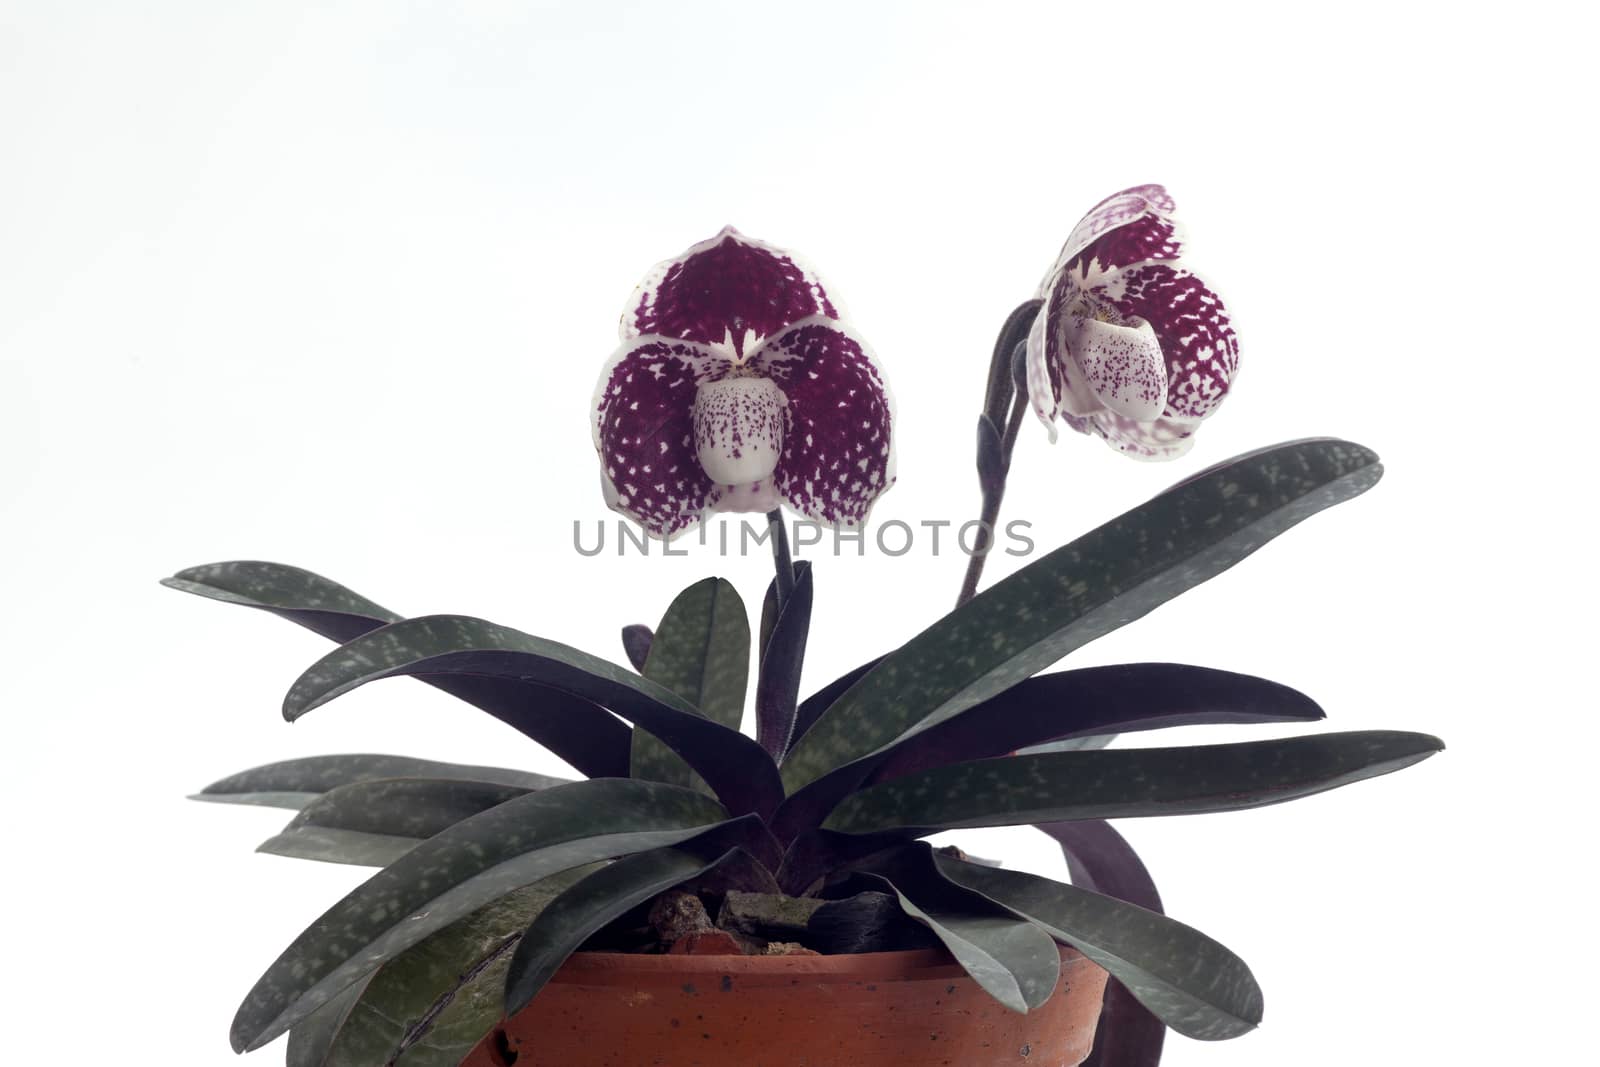 Paphiopedilum godefroyae is a species of orchid endemic to peninsular Thailand, Vietnam and Malaysia.